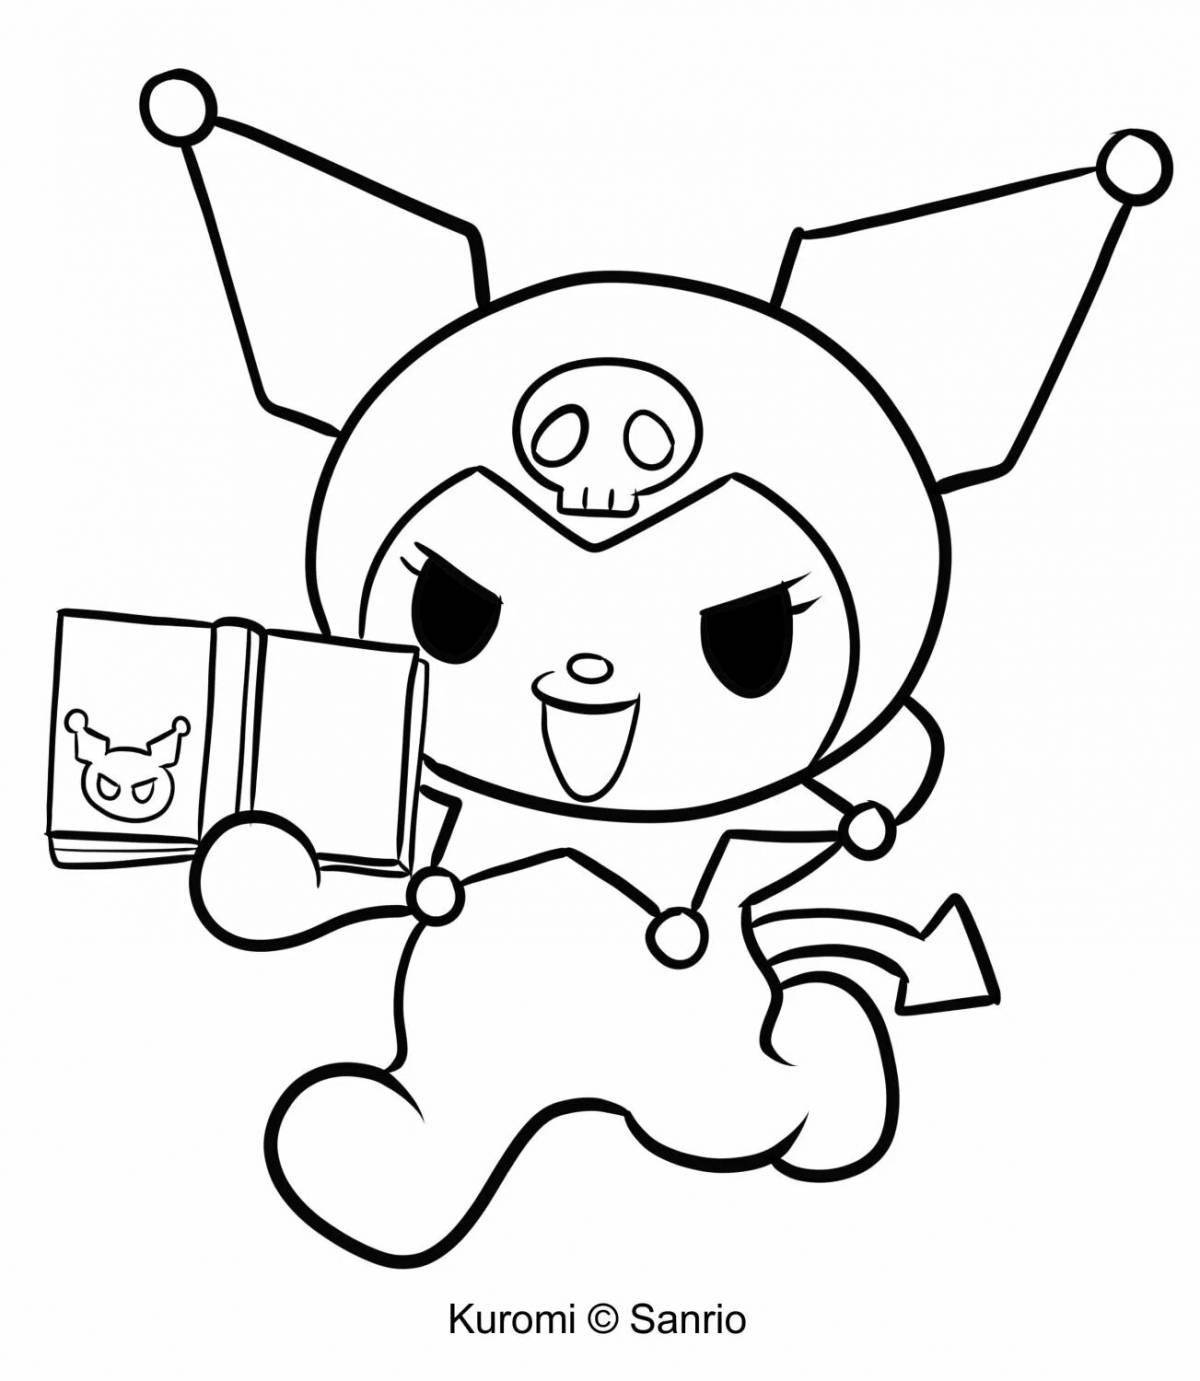 Live little hello kitty kuromi coloring page